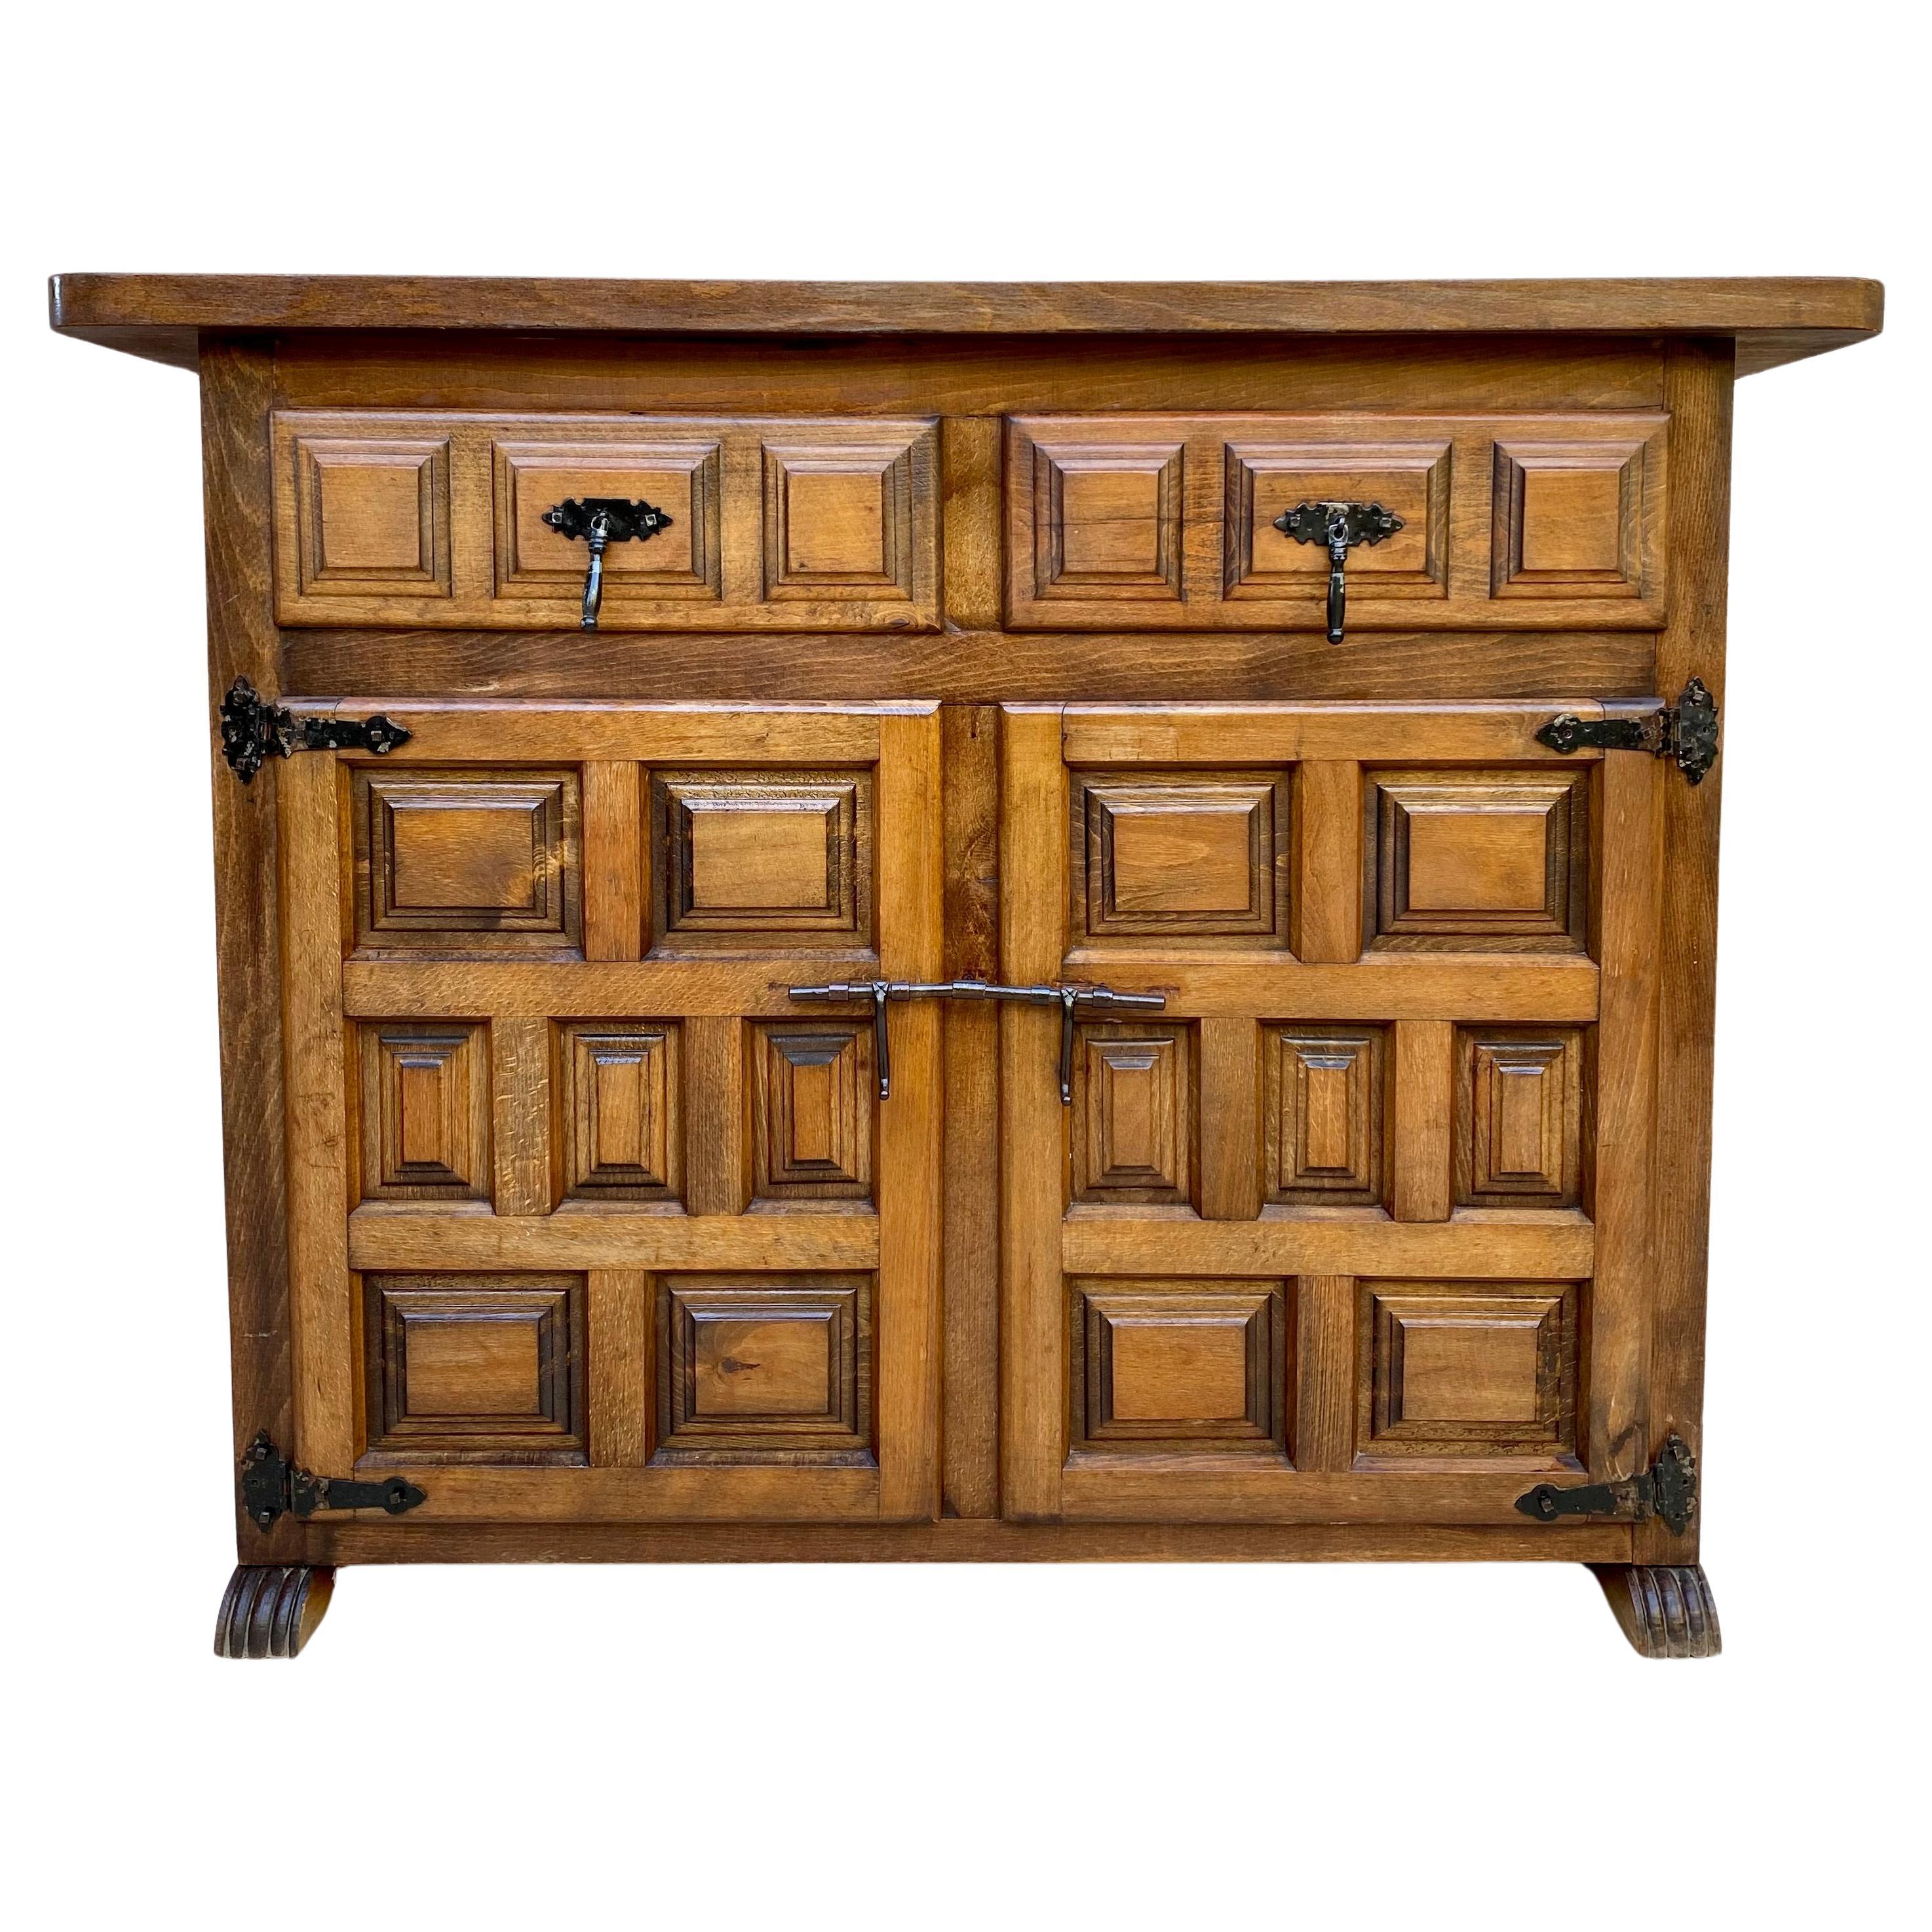 Spanish Catalan Carved Walnut Chest of Drawers, Highboy or Console, 1920s